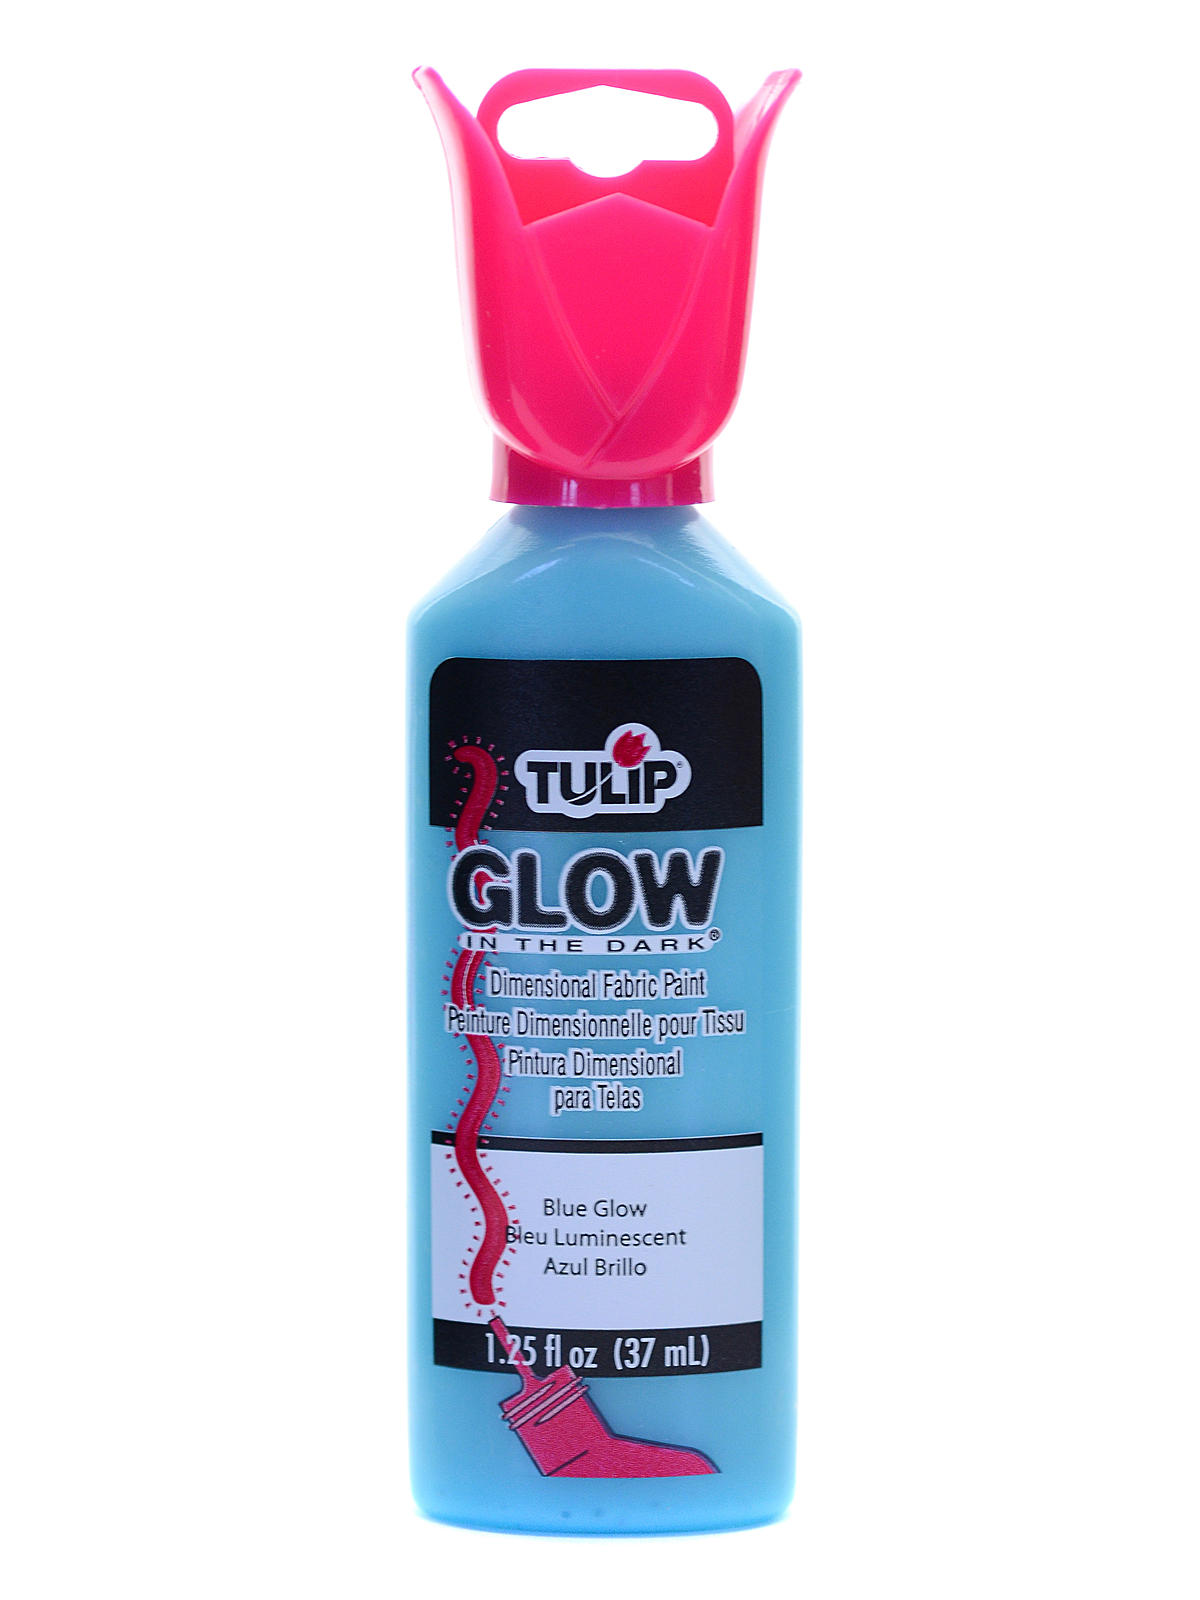 Glow In The Dark Dimensional Fabric Paint Blue 1 1 4 Oz.